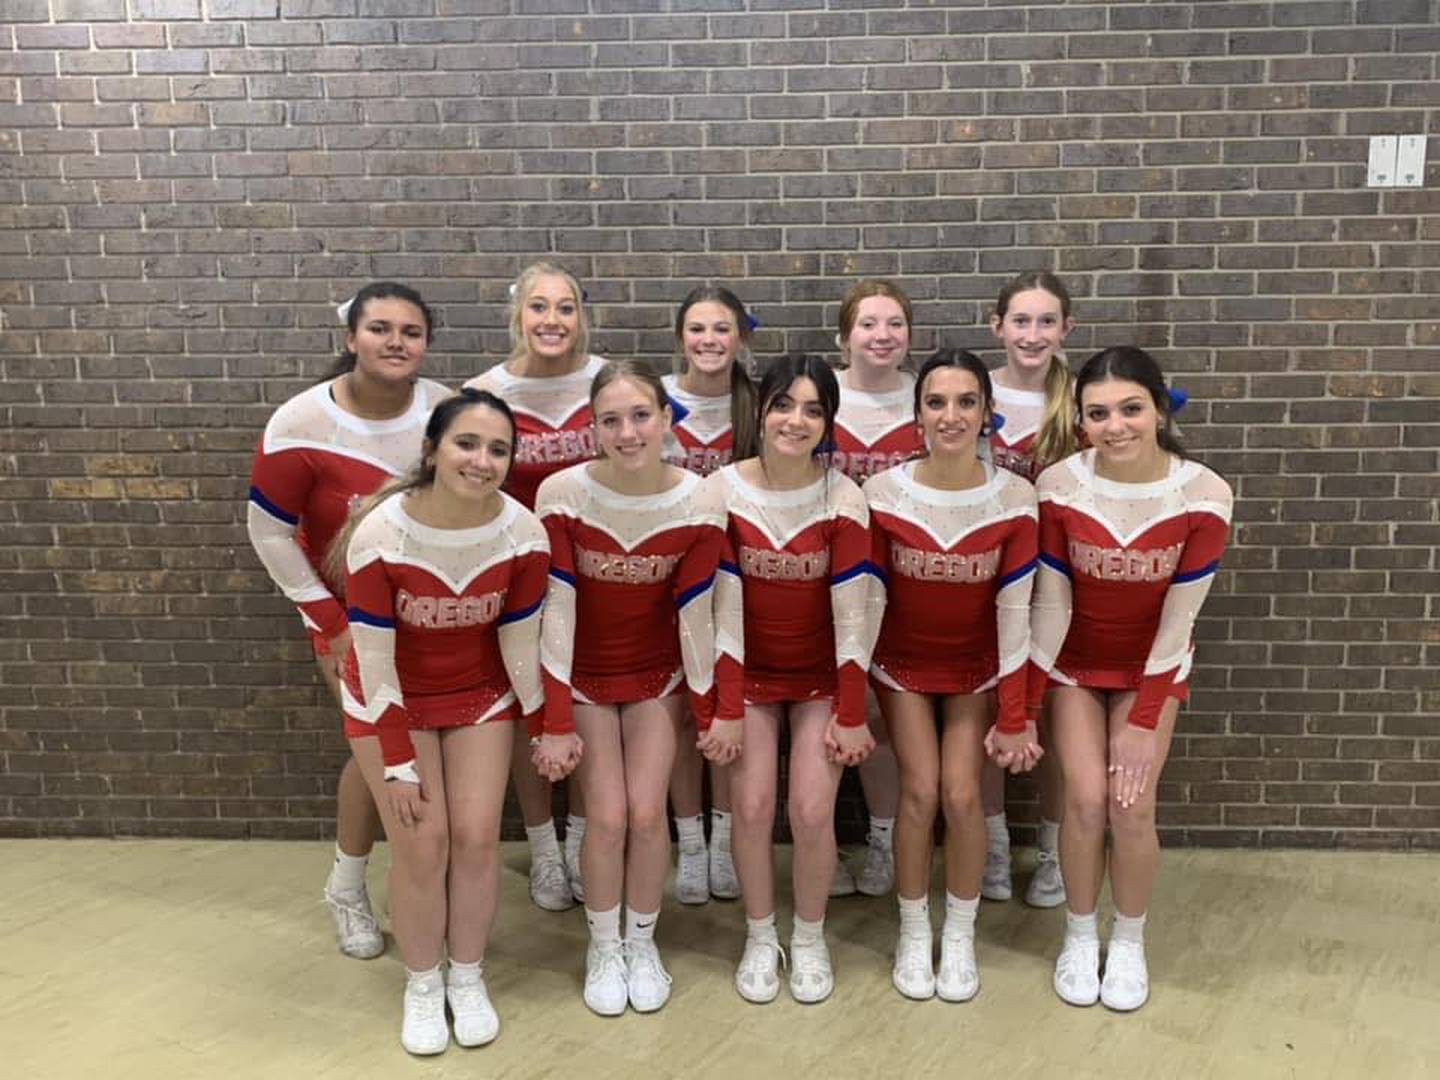 Oregon High School's competitive cheerleading team.  The competition roster includes Lariaha Hayes, Grace Eisenrich, Kaelin Shaffer, Keltie Champly, Taylor Weems, Alexis Ortega, Libby Patterson, Allysa Schefcik, Makena Barcai, and Aubree Schefcik.